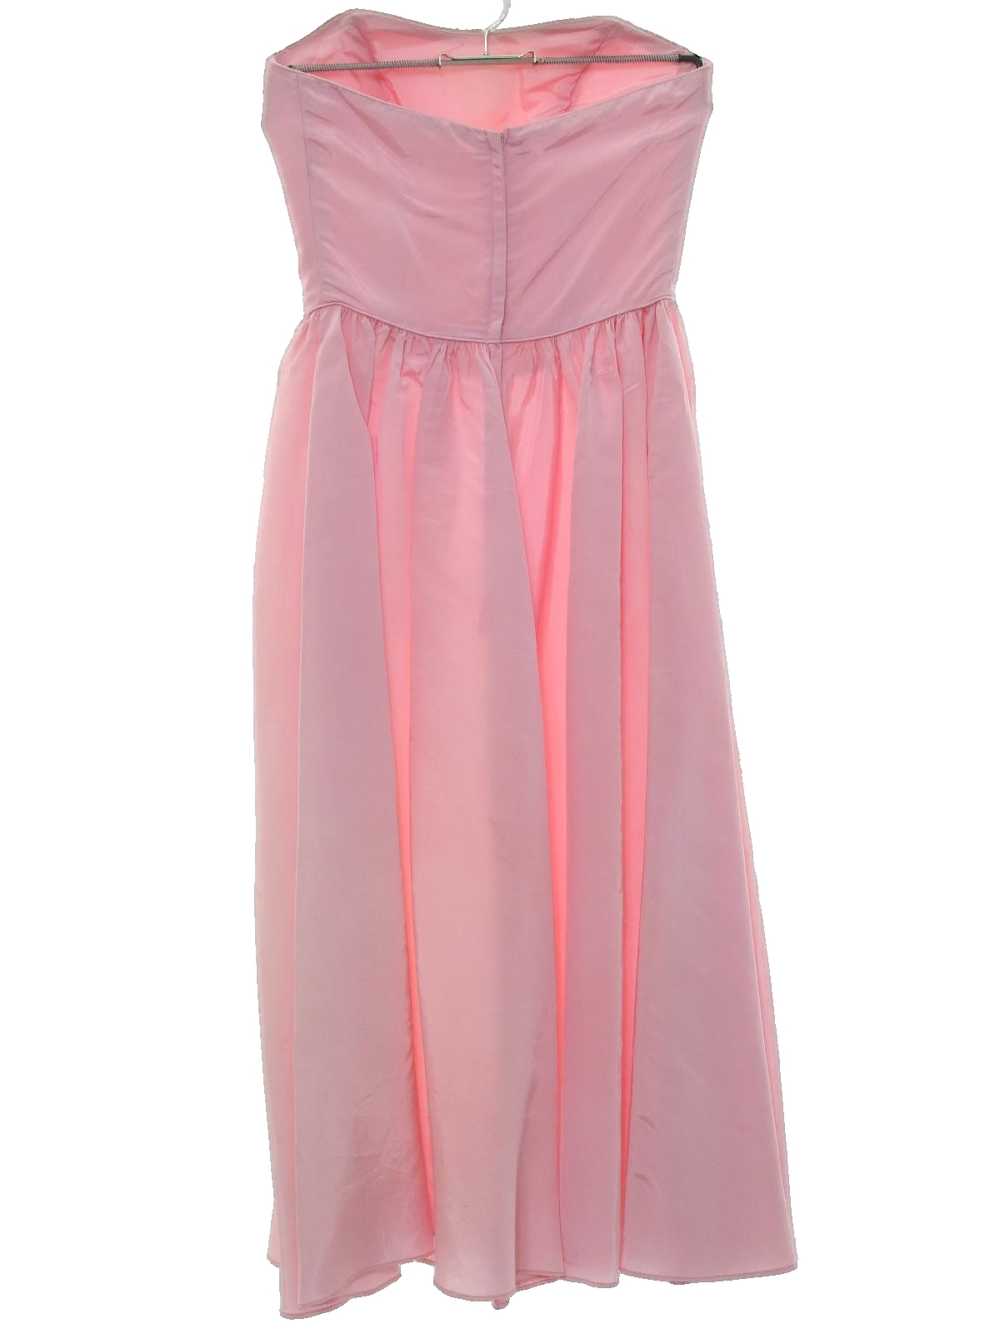 1980's Totally 80s Prom Or Cocktail Dress - image 3